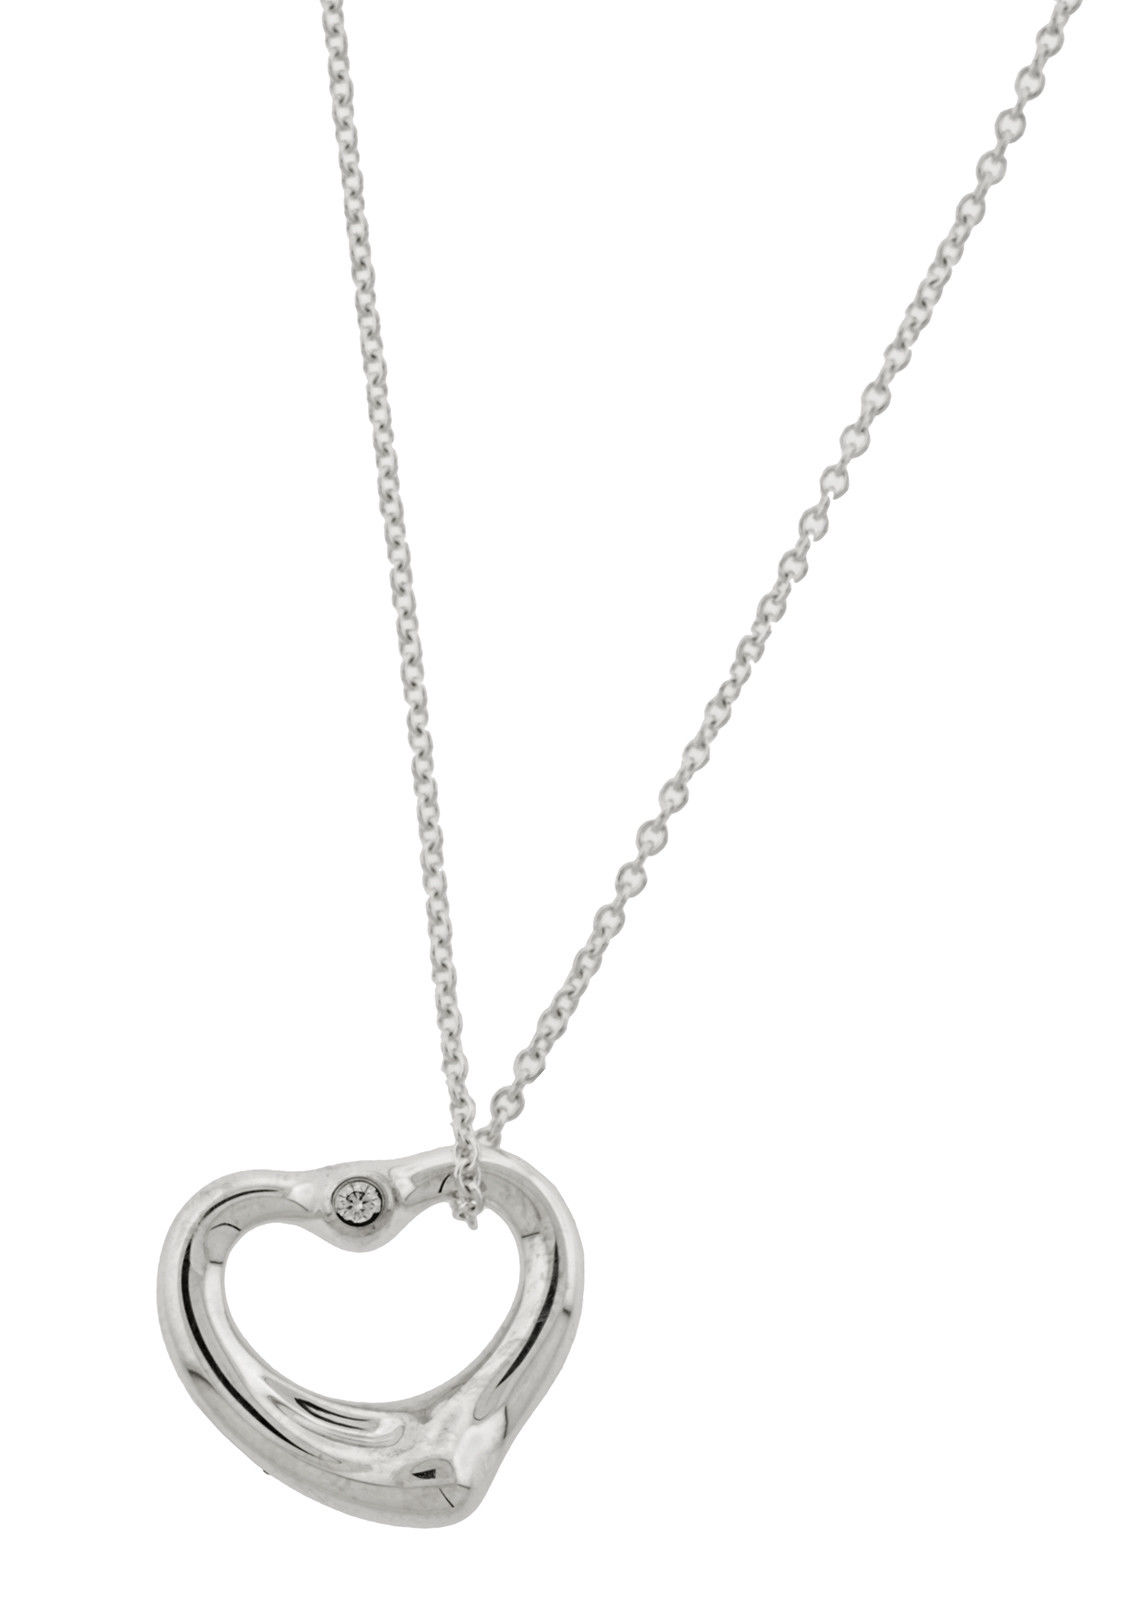 Tiffany & Co. Silver Peretti 3 Open Heart Pendant Necklace – Elite HNW -  High End Watches, Jewellery & Art Boutique